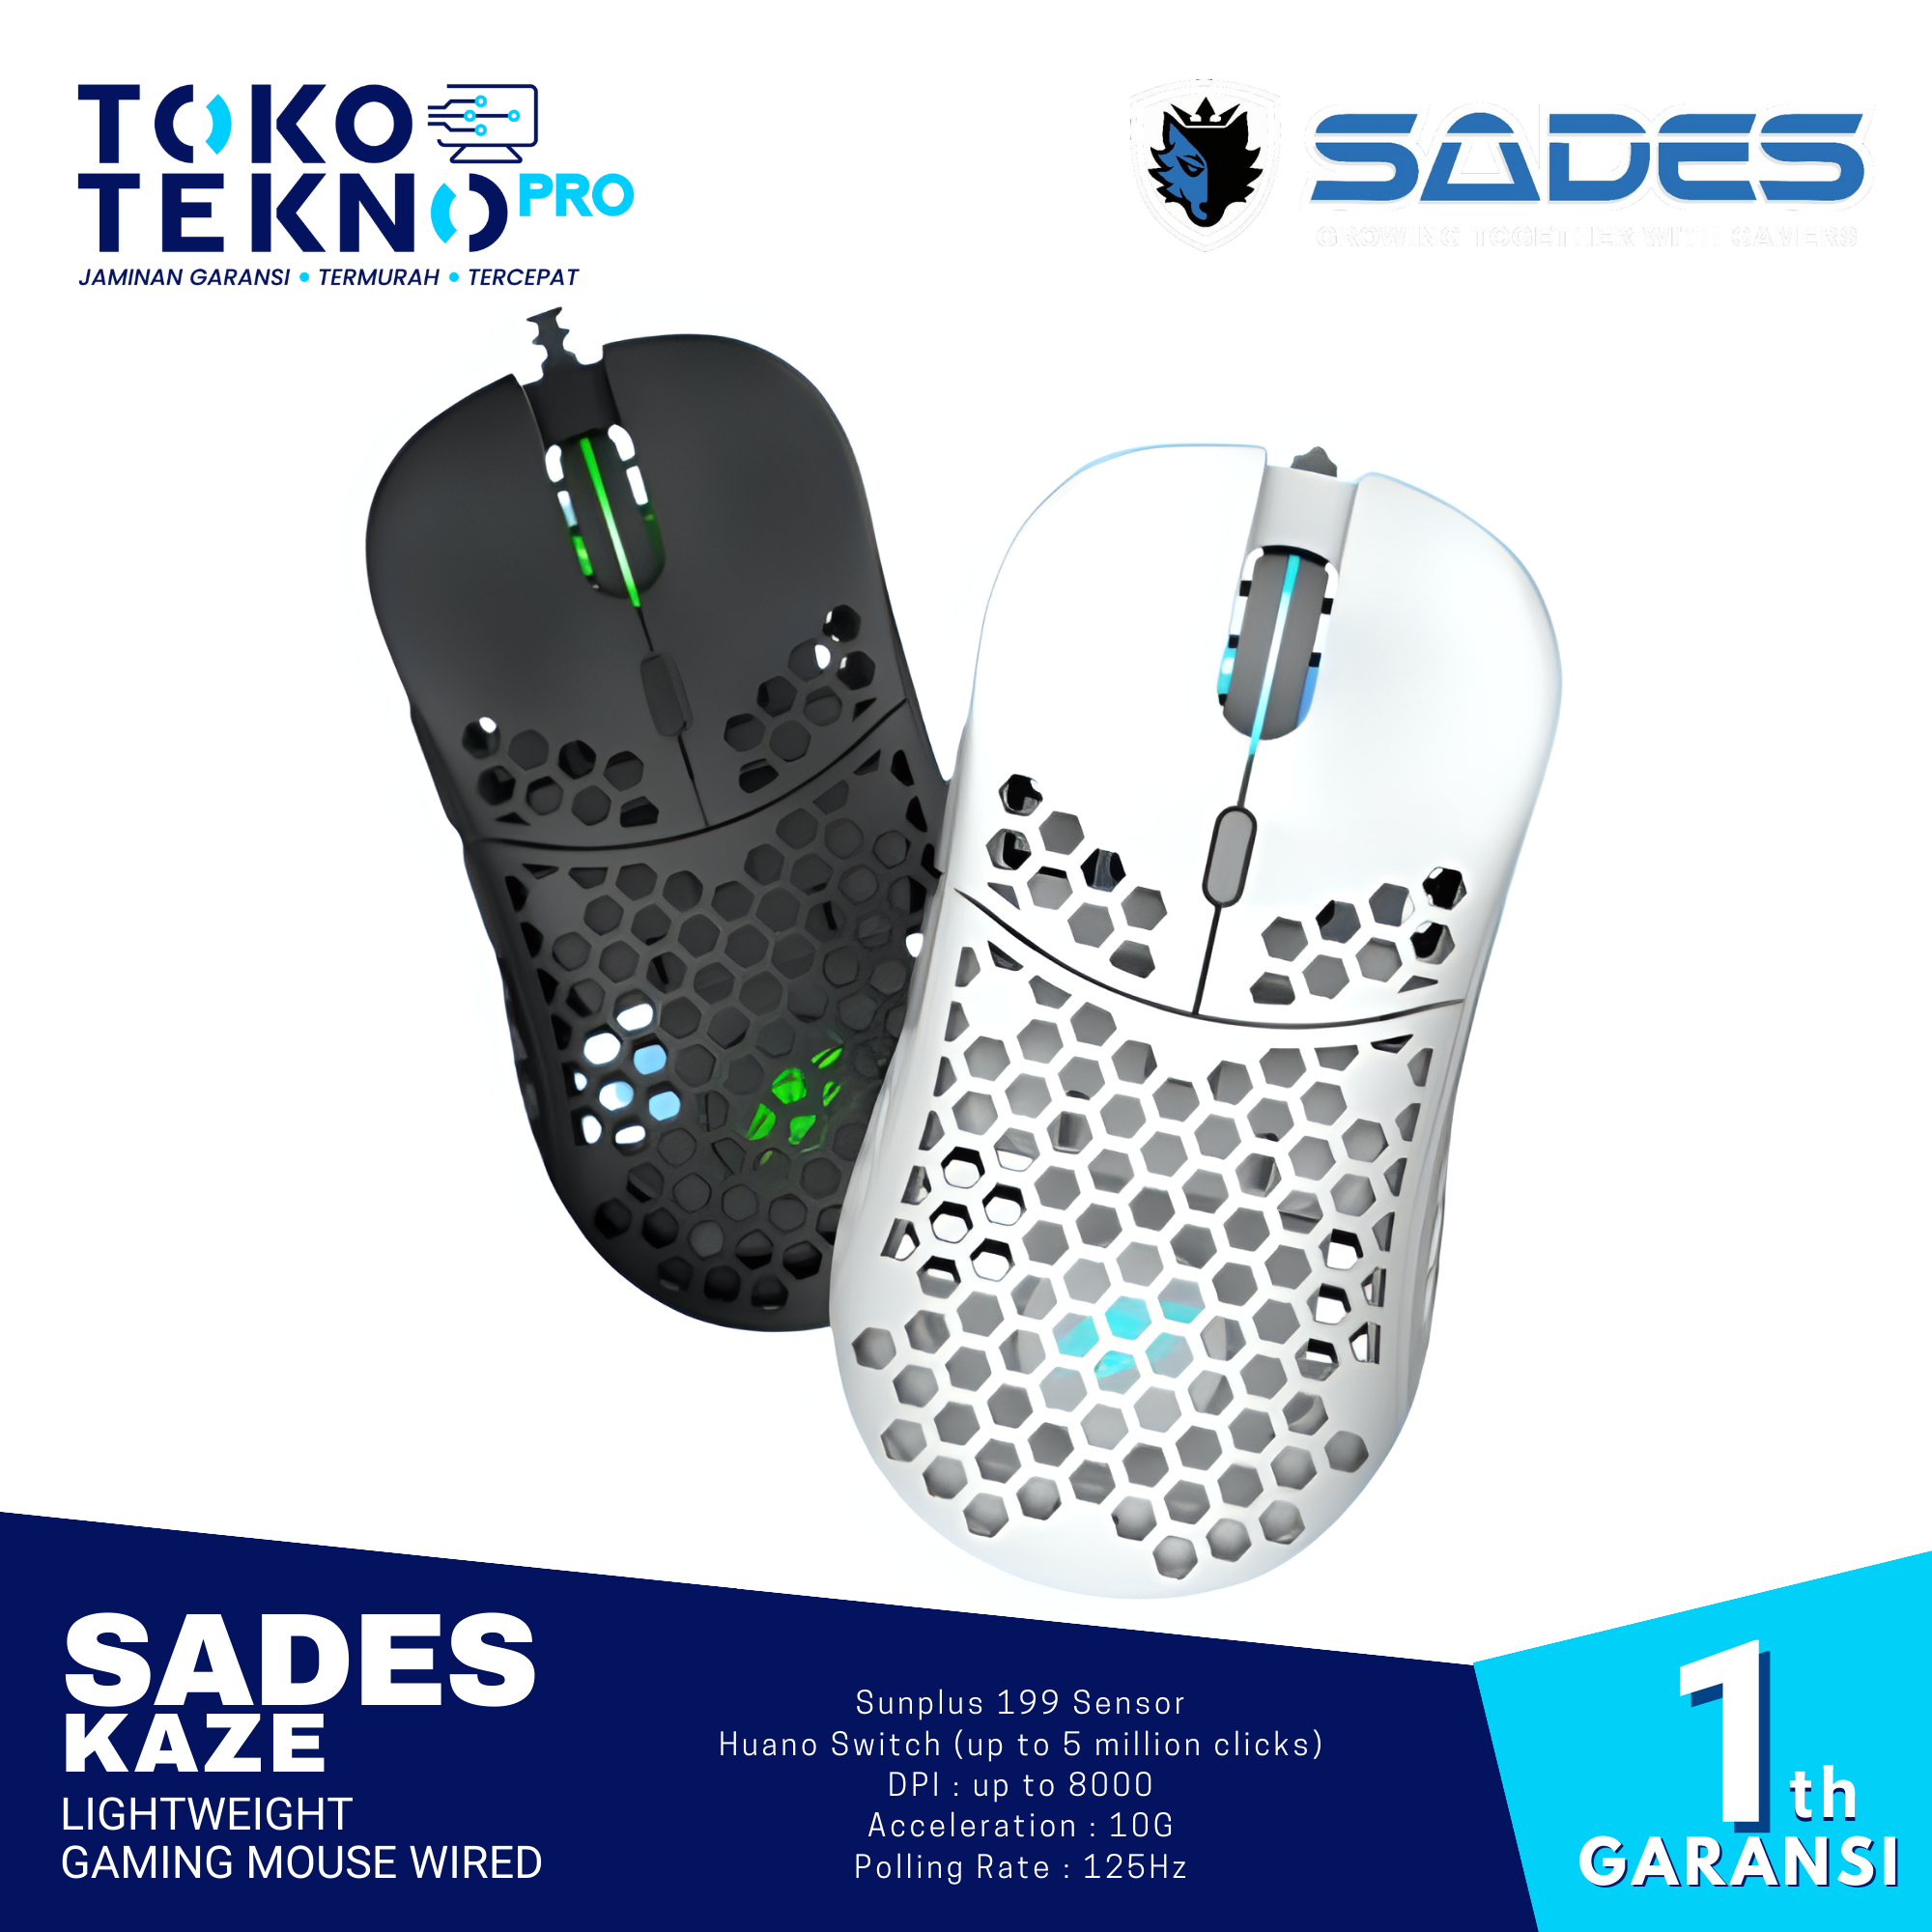 Sades Kaze Lightweight Gaming Mouse Wired